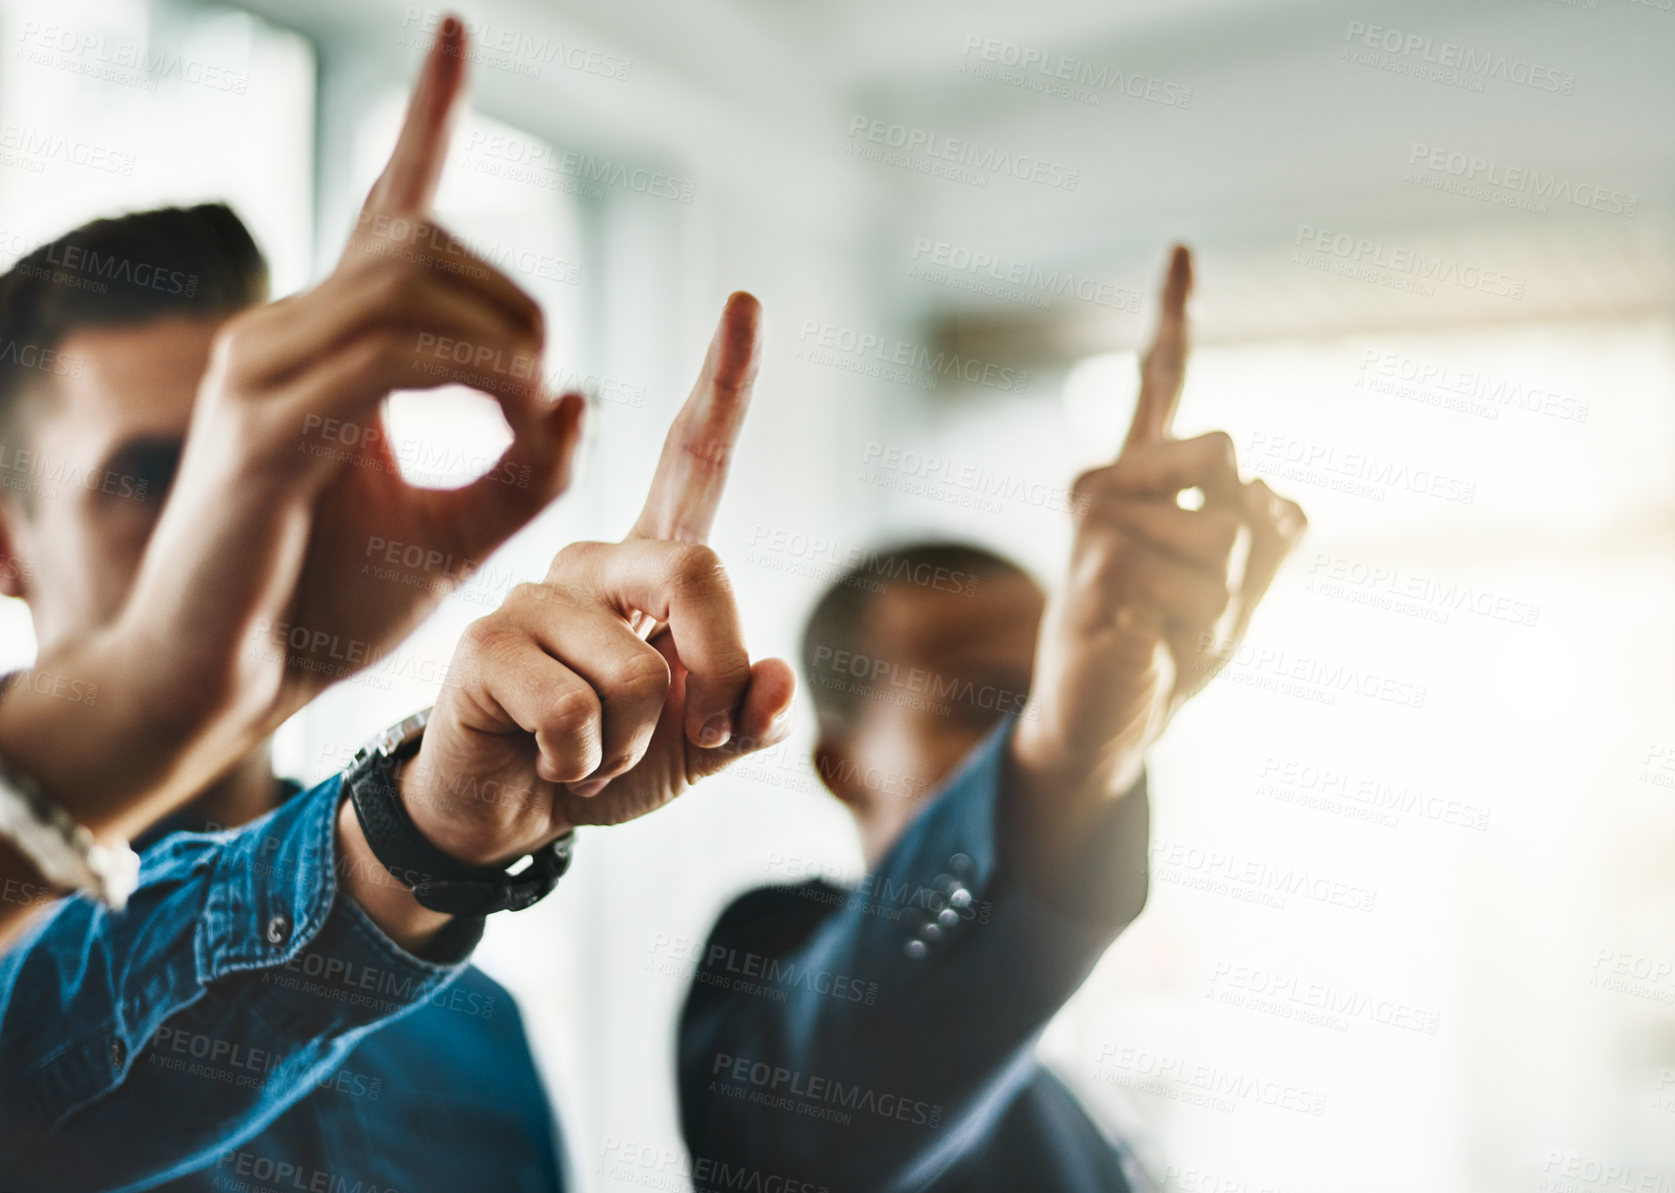 Buy stock photo Cropped shot of a group of businesspeople raising their hands in an office